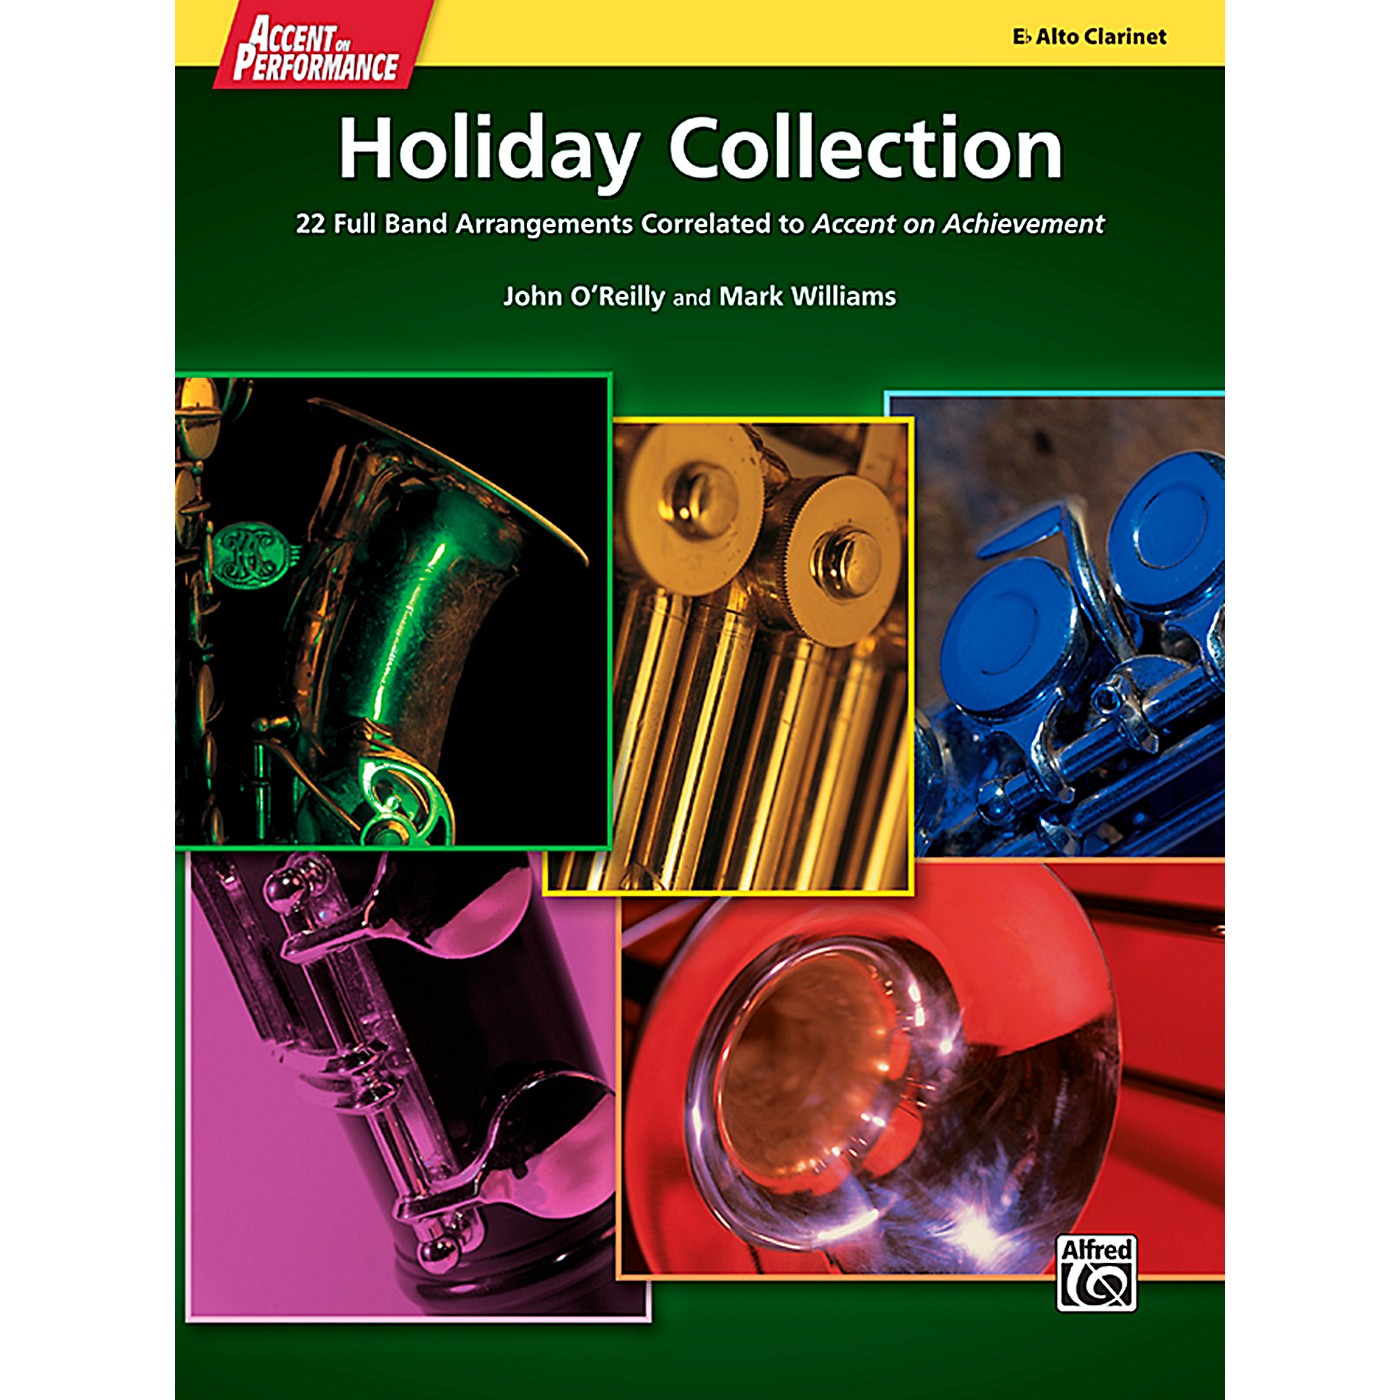 Alfred Accent on Performance Holiday Collection Alto Clarinet Book thumbnail